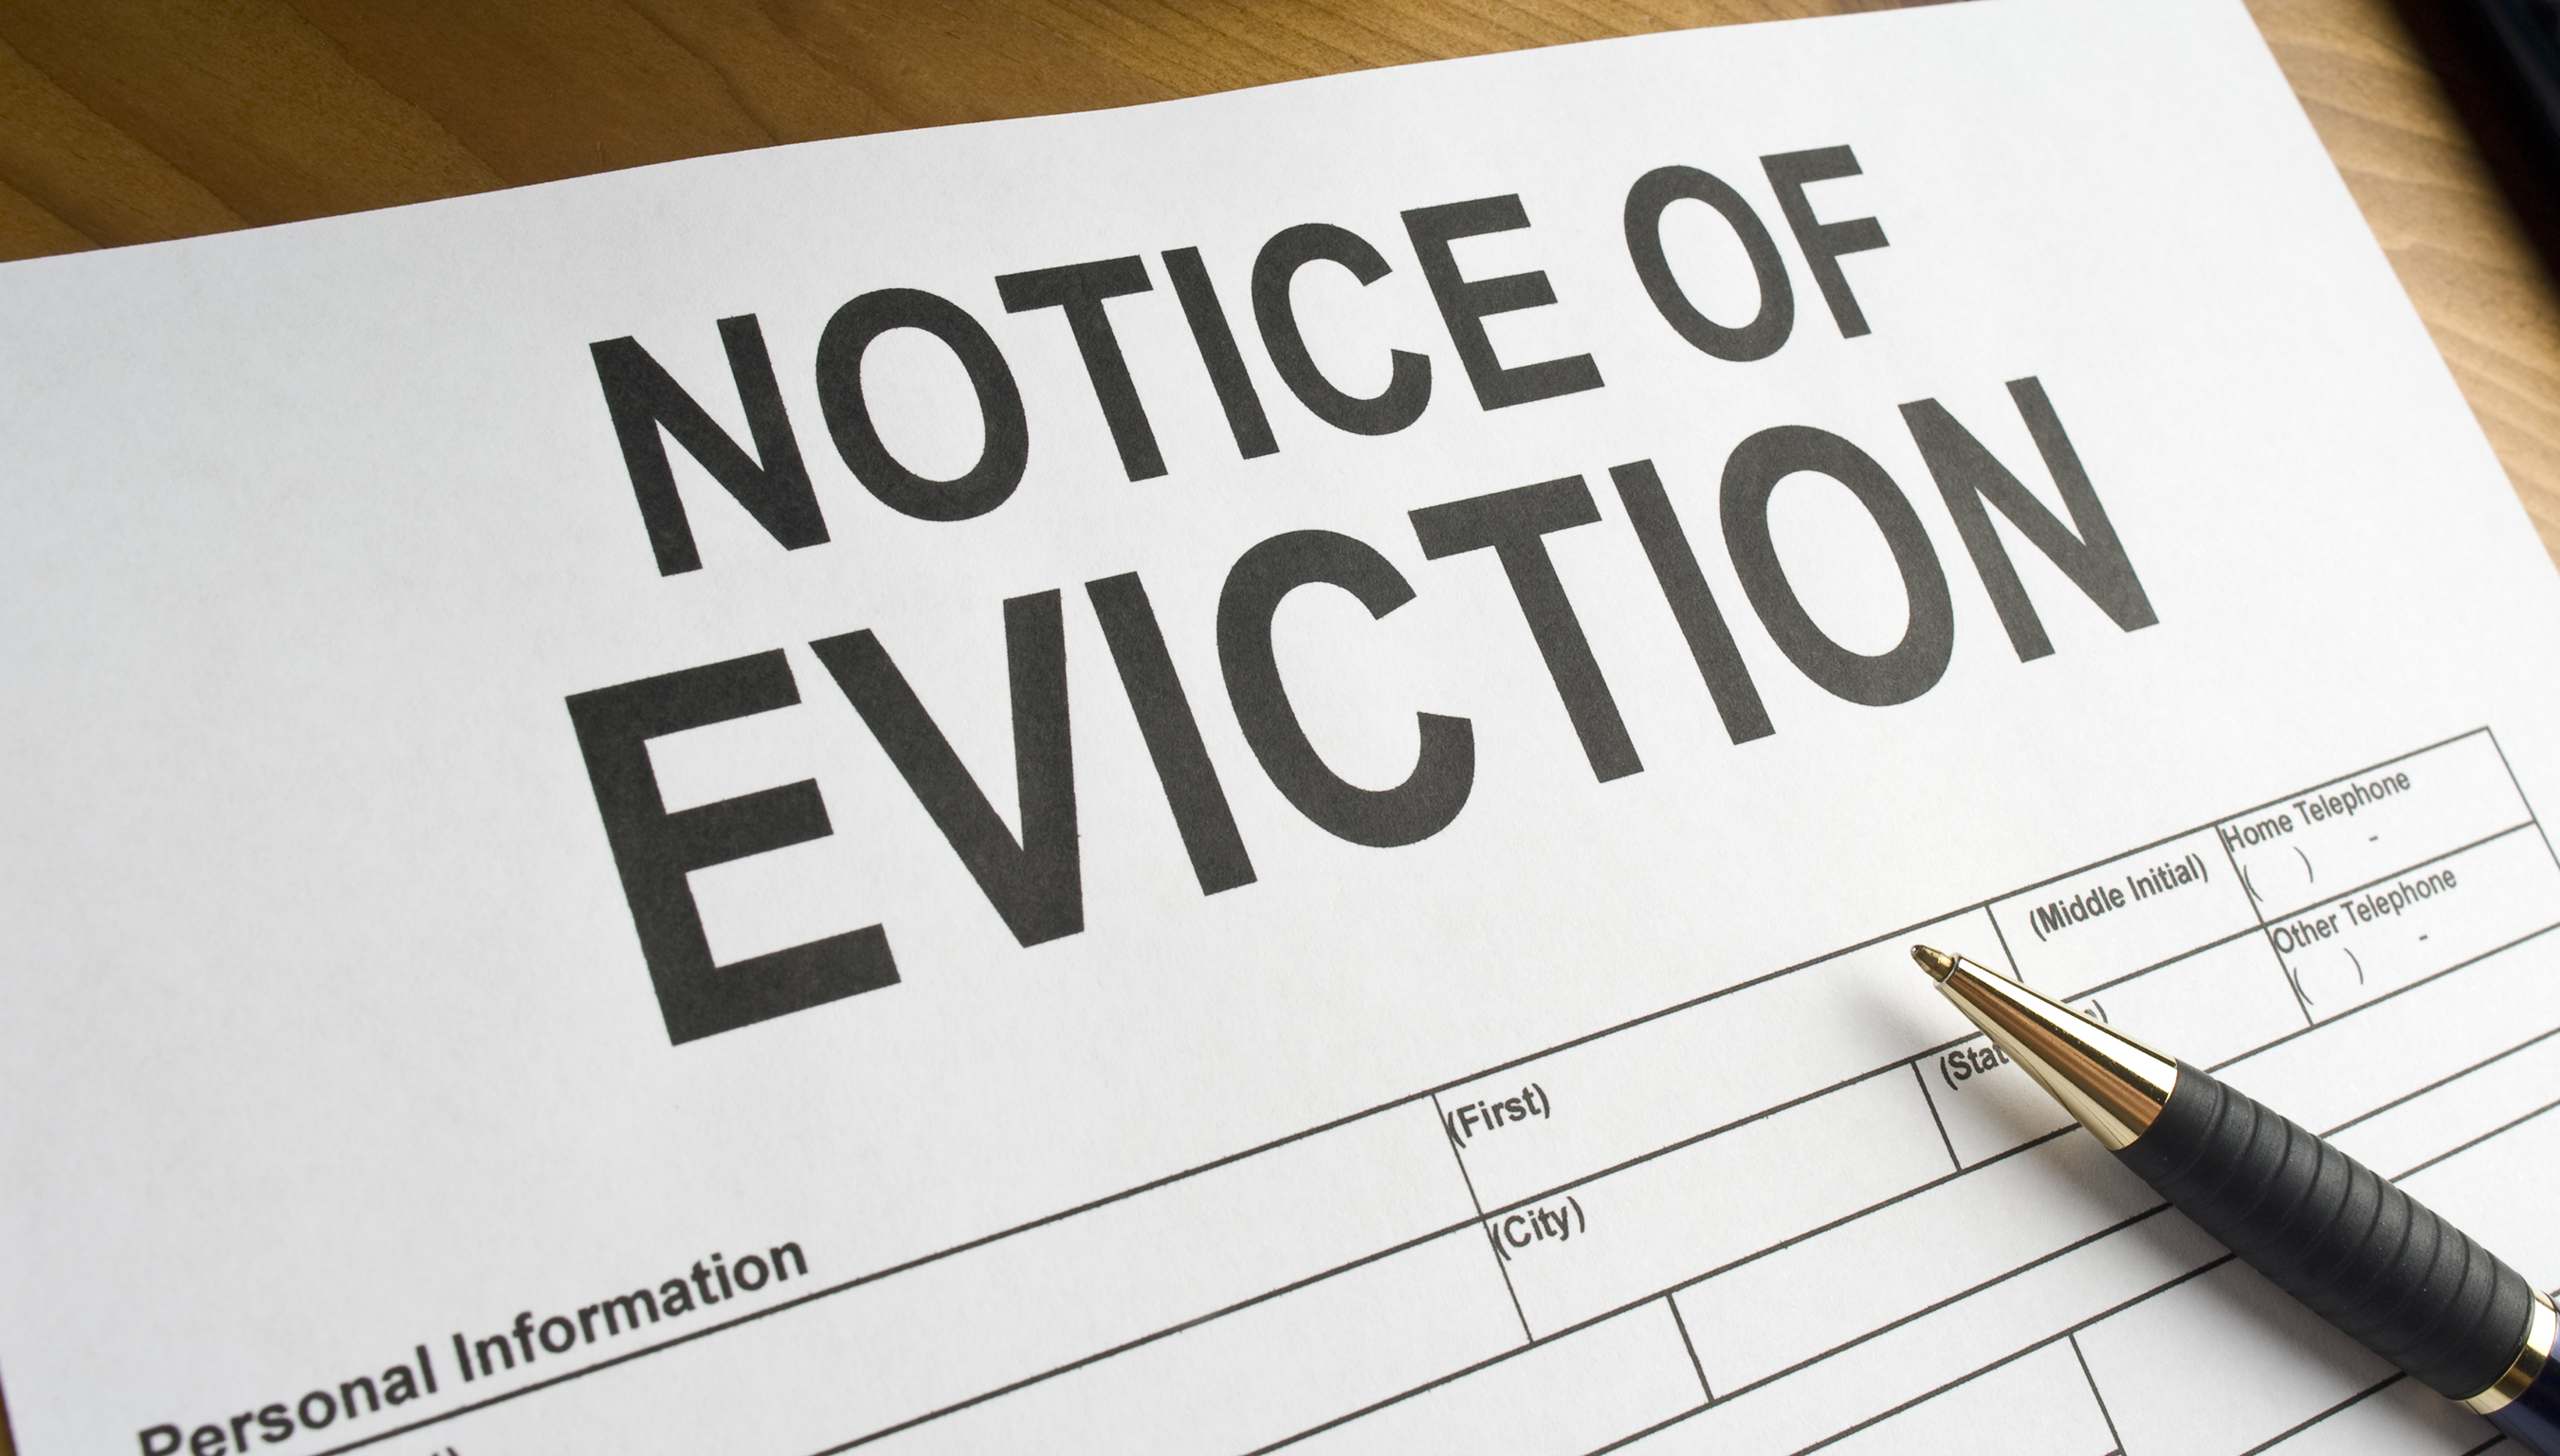 CDC’S EVICTION STOP ENDING SOON